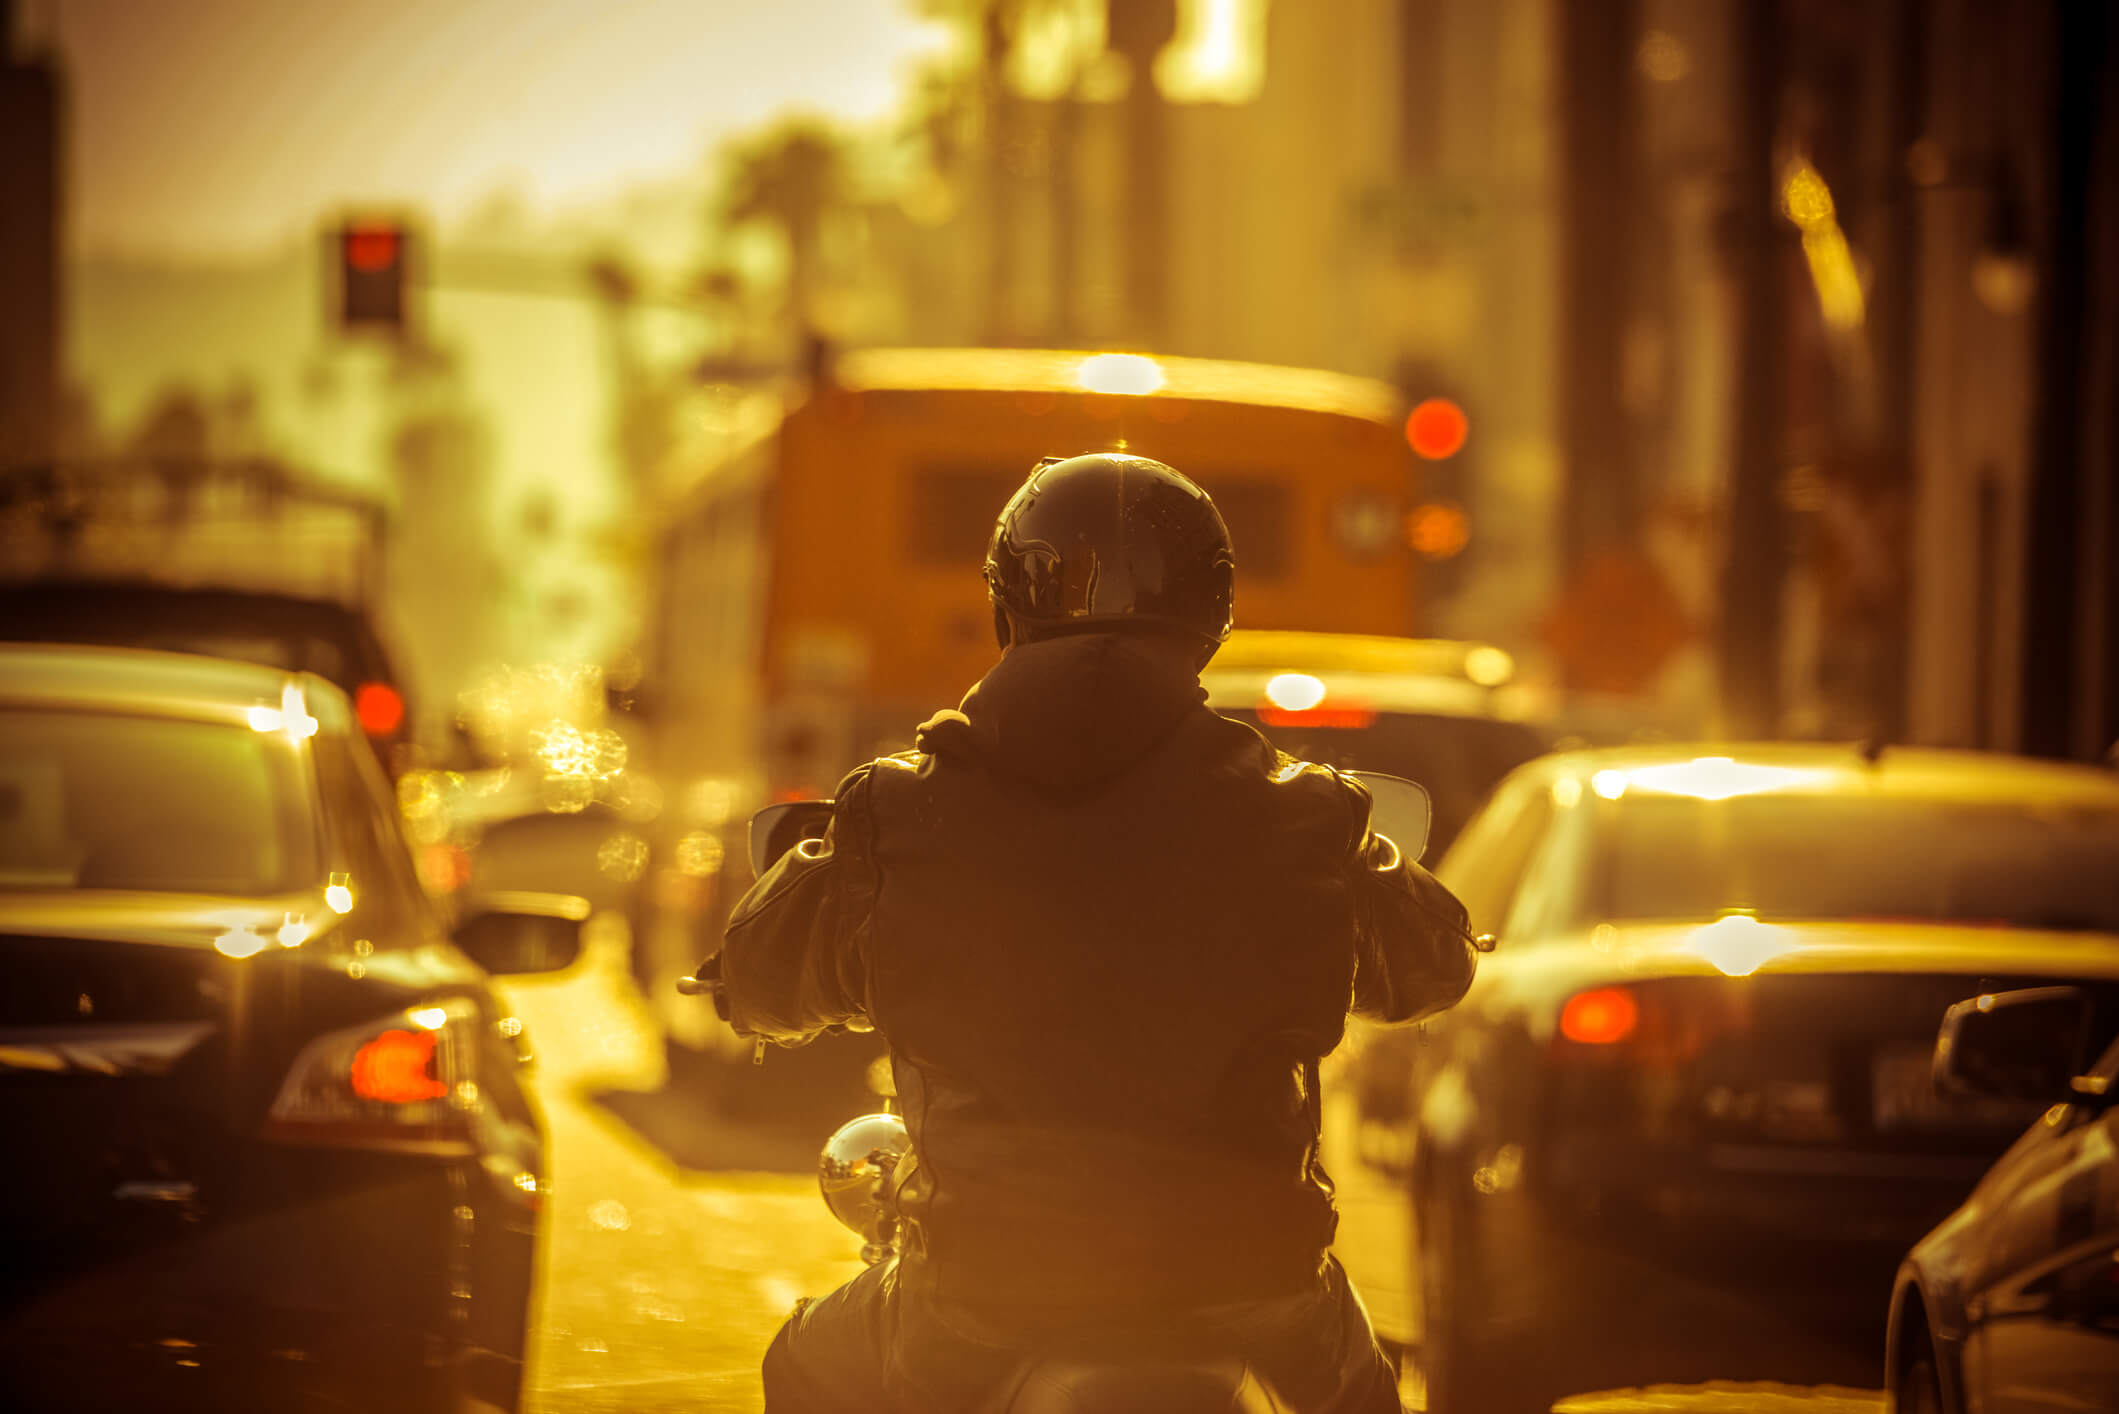 Motorcyclist at an intersection.